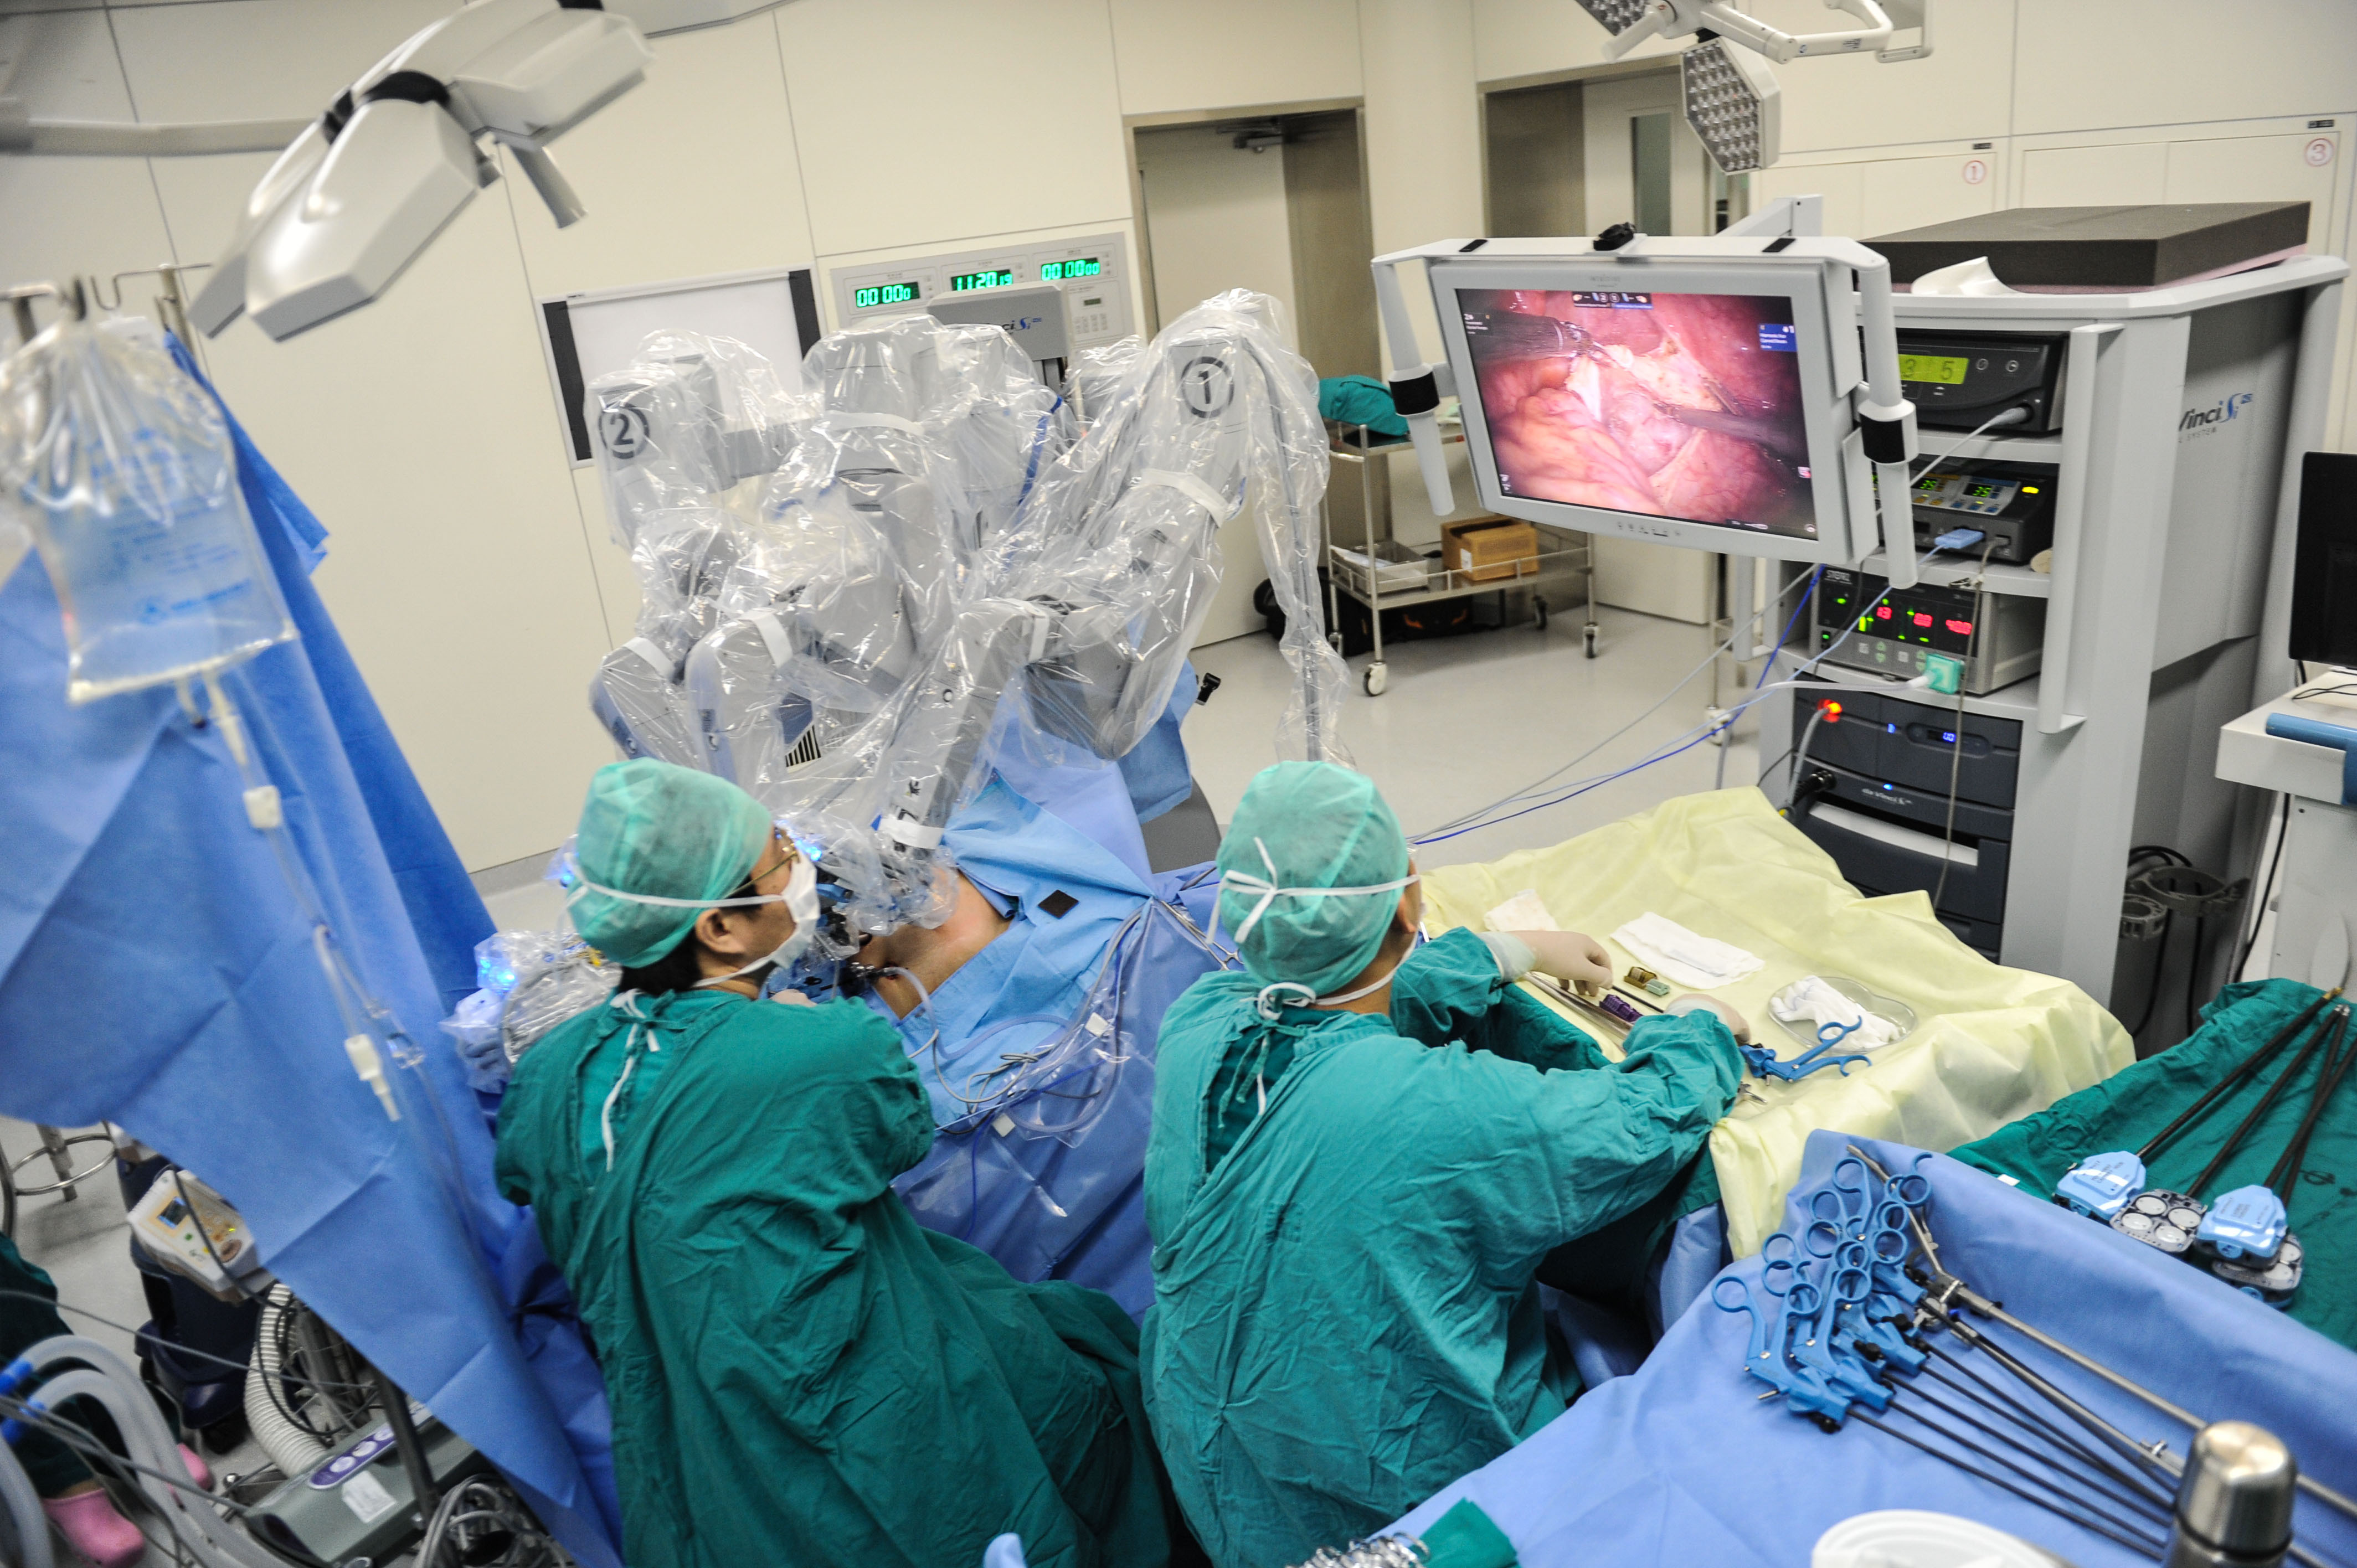 This robotic surgical system could be more accurate than human surgeons.